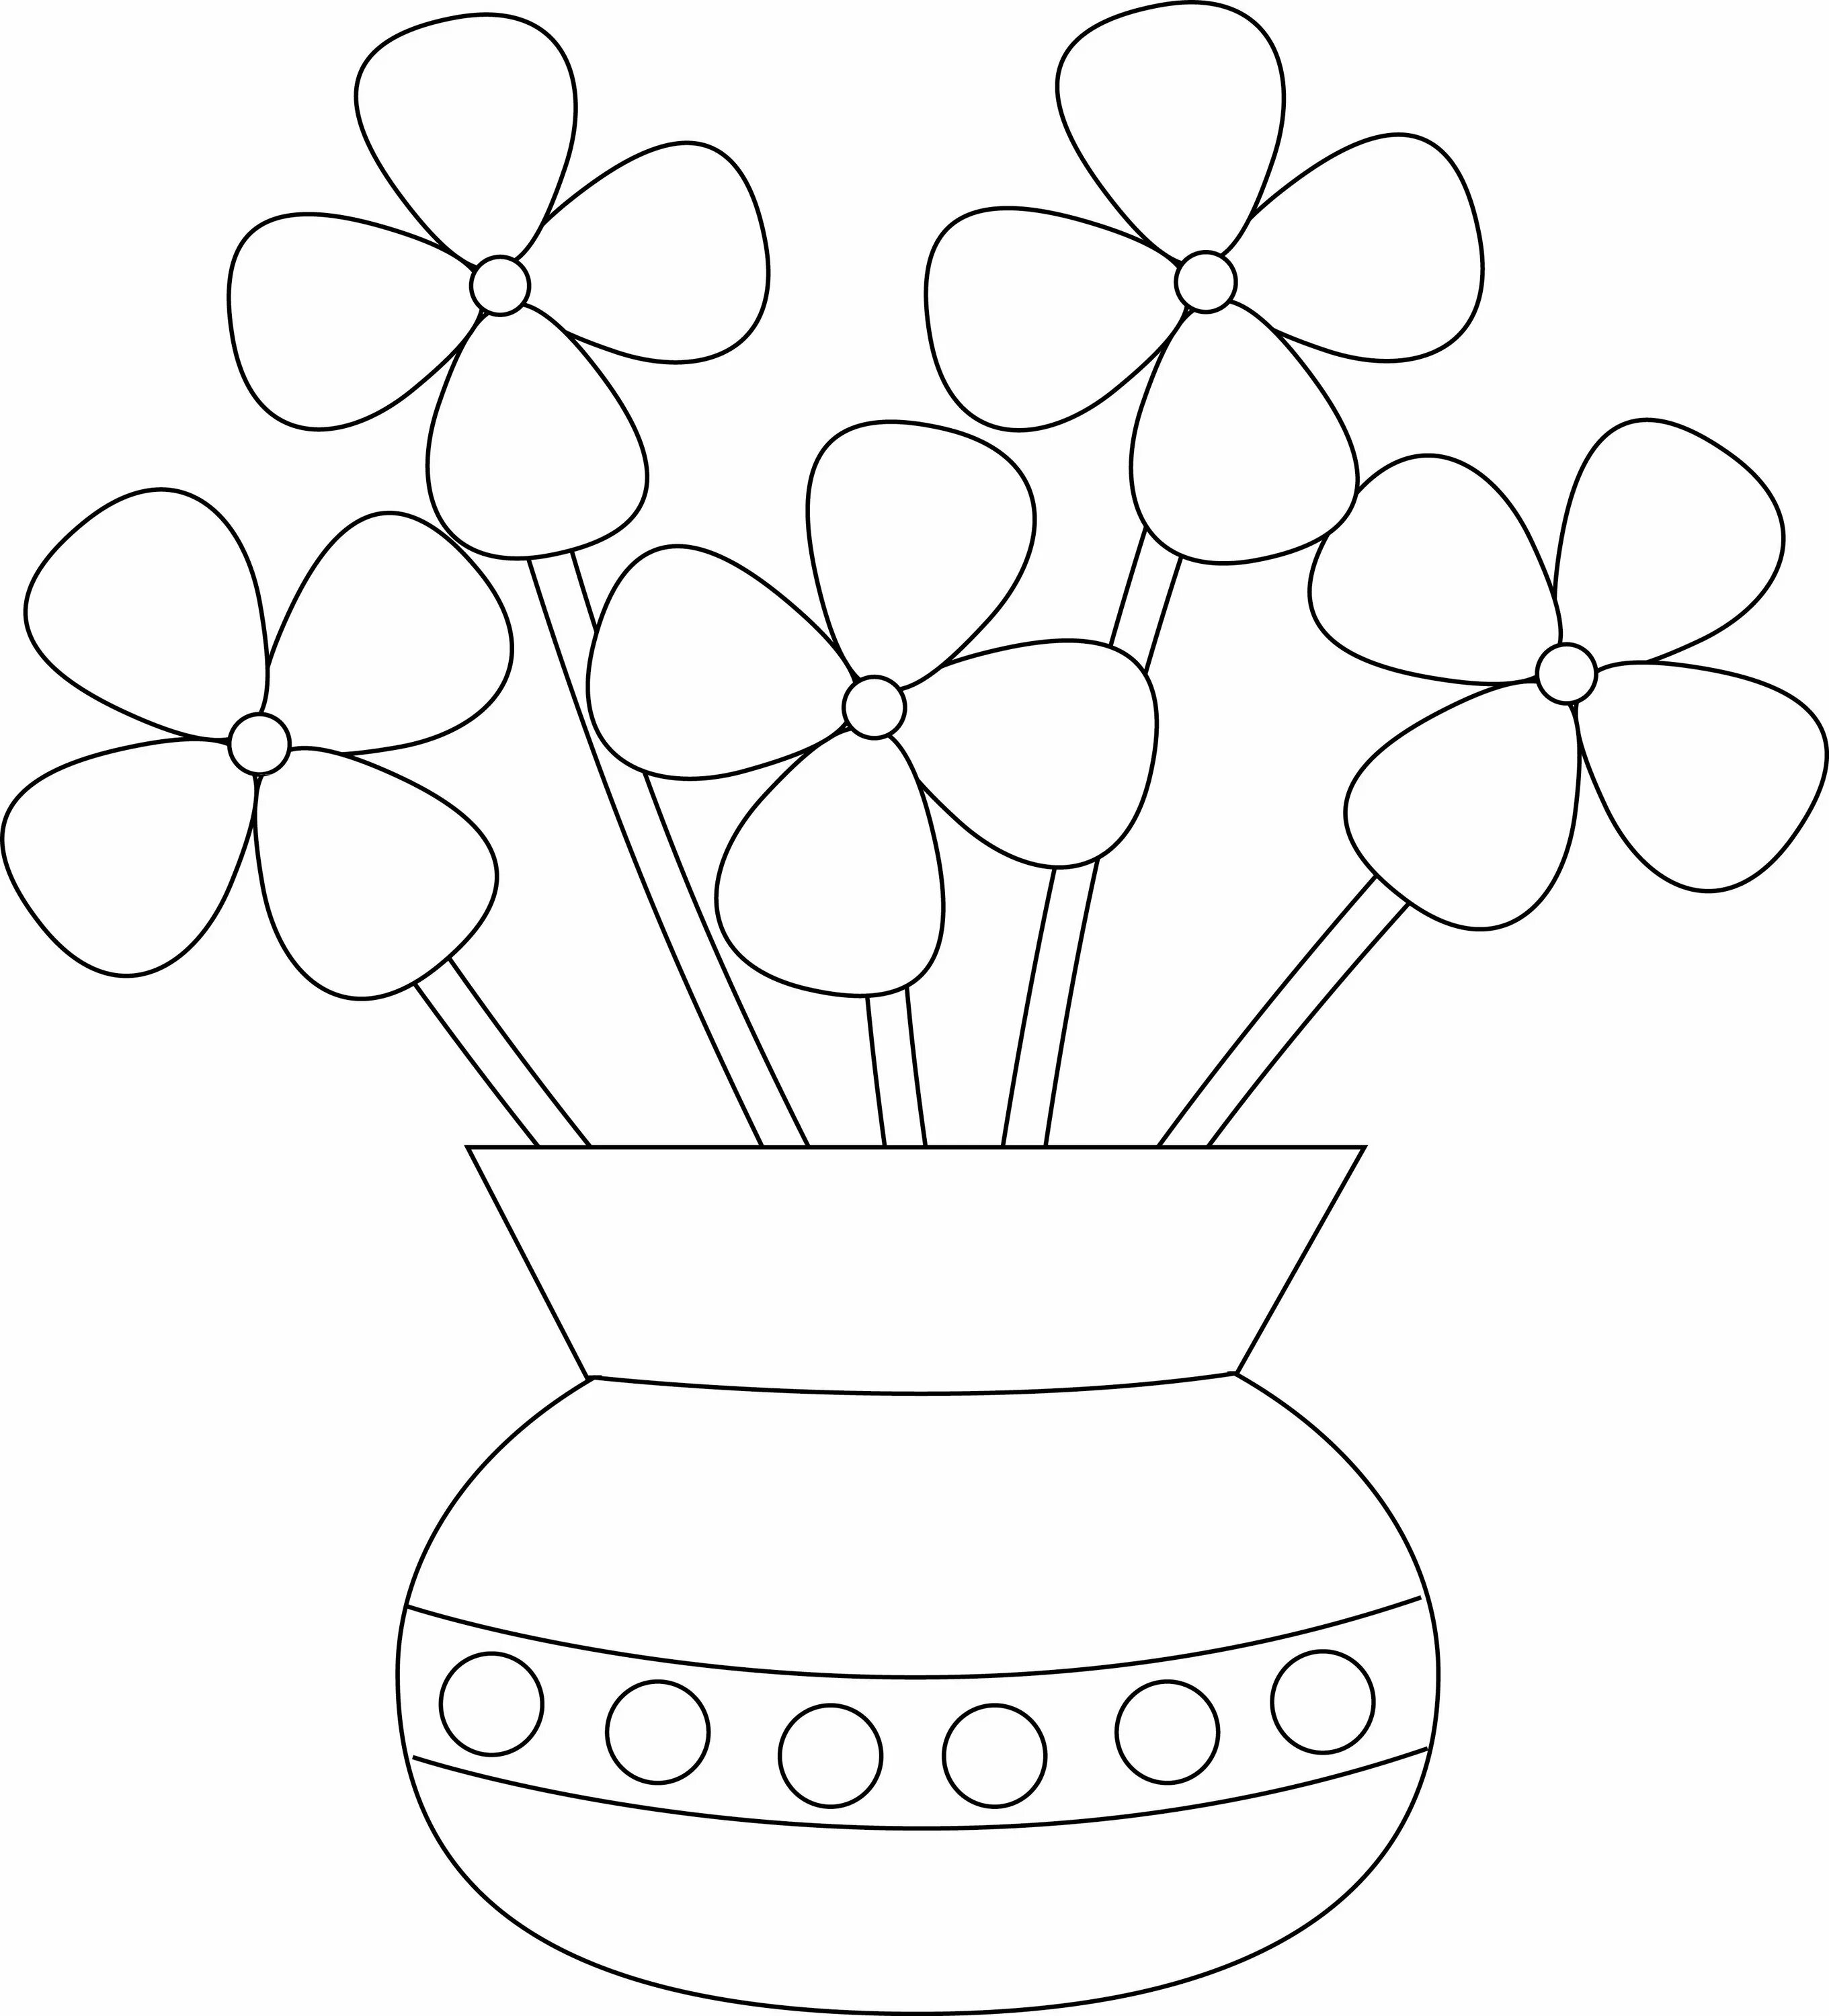 Coloring page playful bouquet for mom